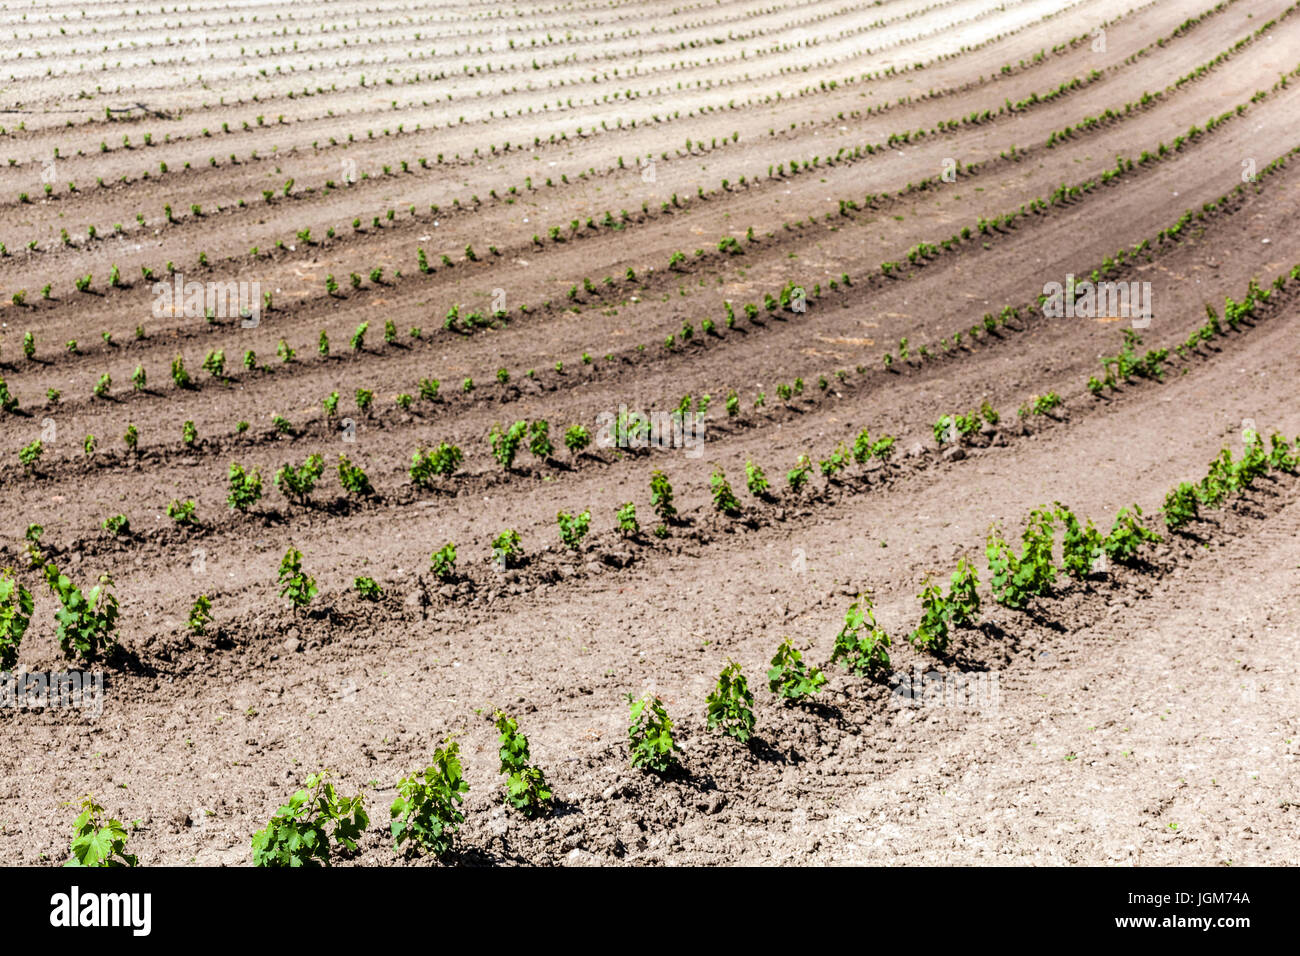 Newly planted vineyards in the Valtice wine region, South Moravia fields Czech Republic, Europe Stock Photo